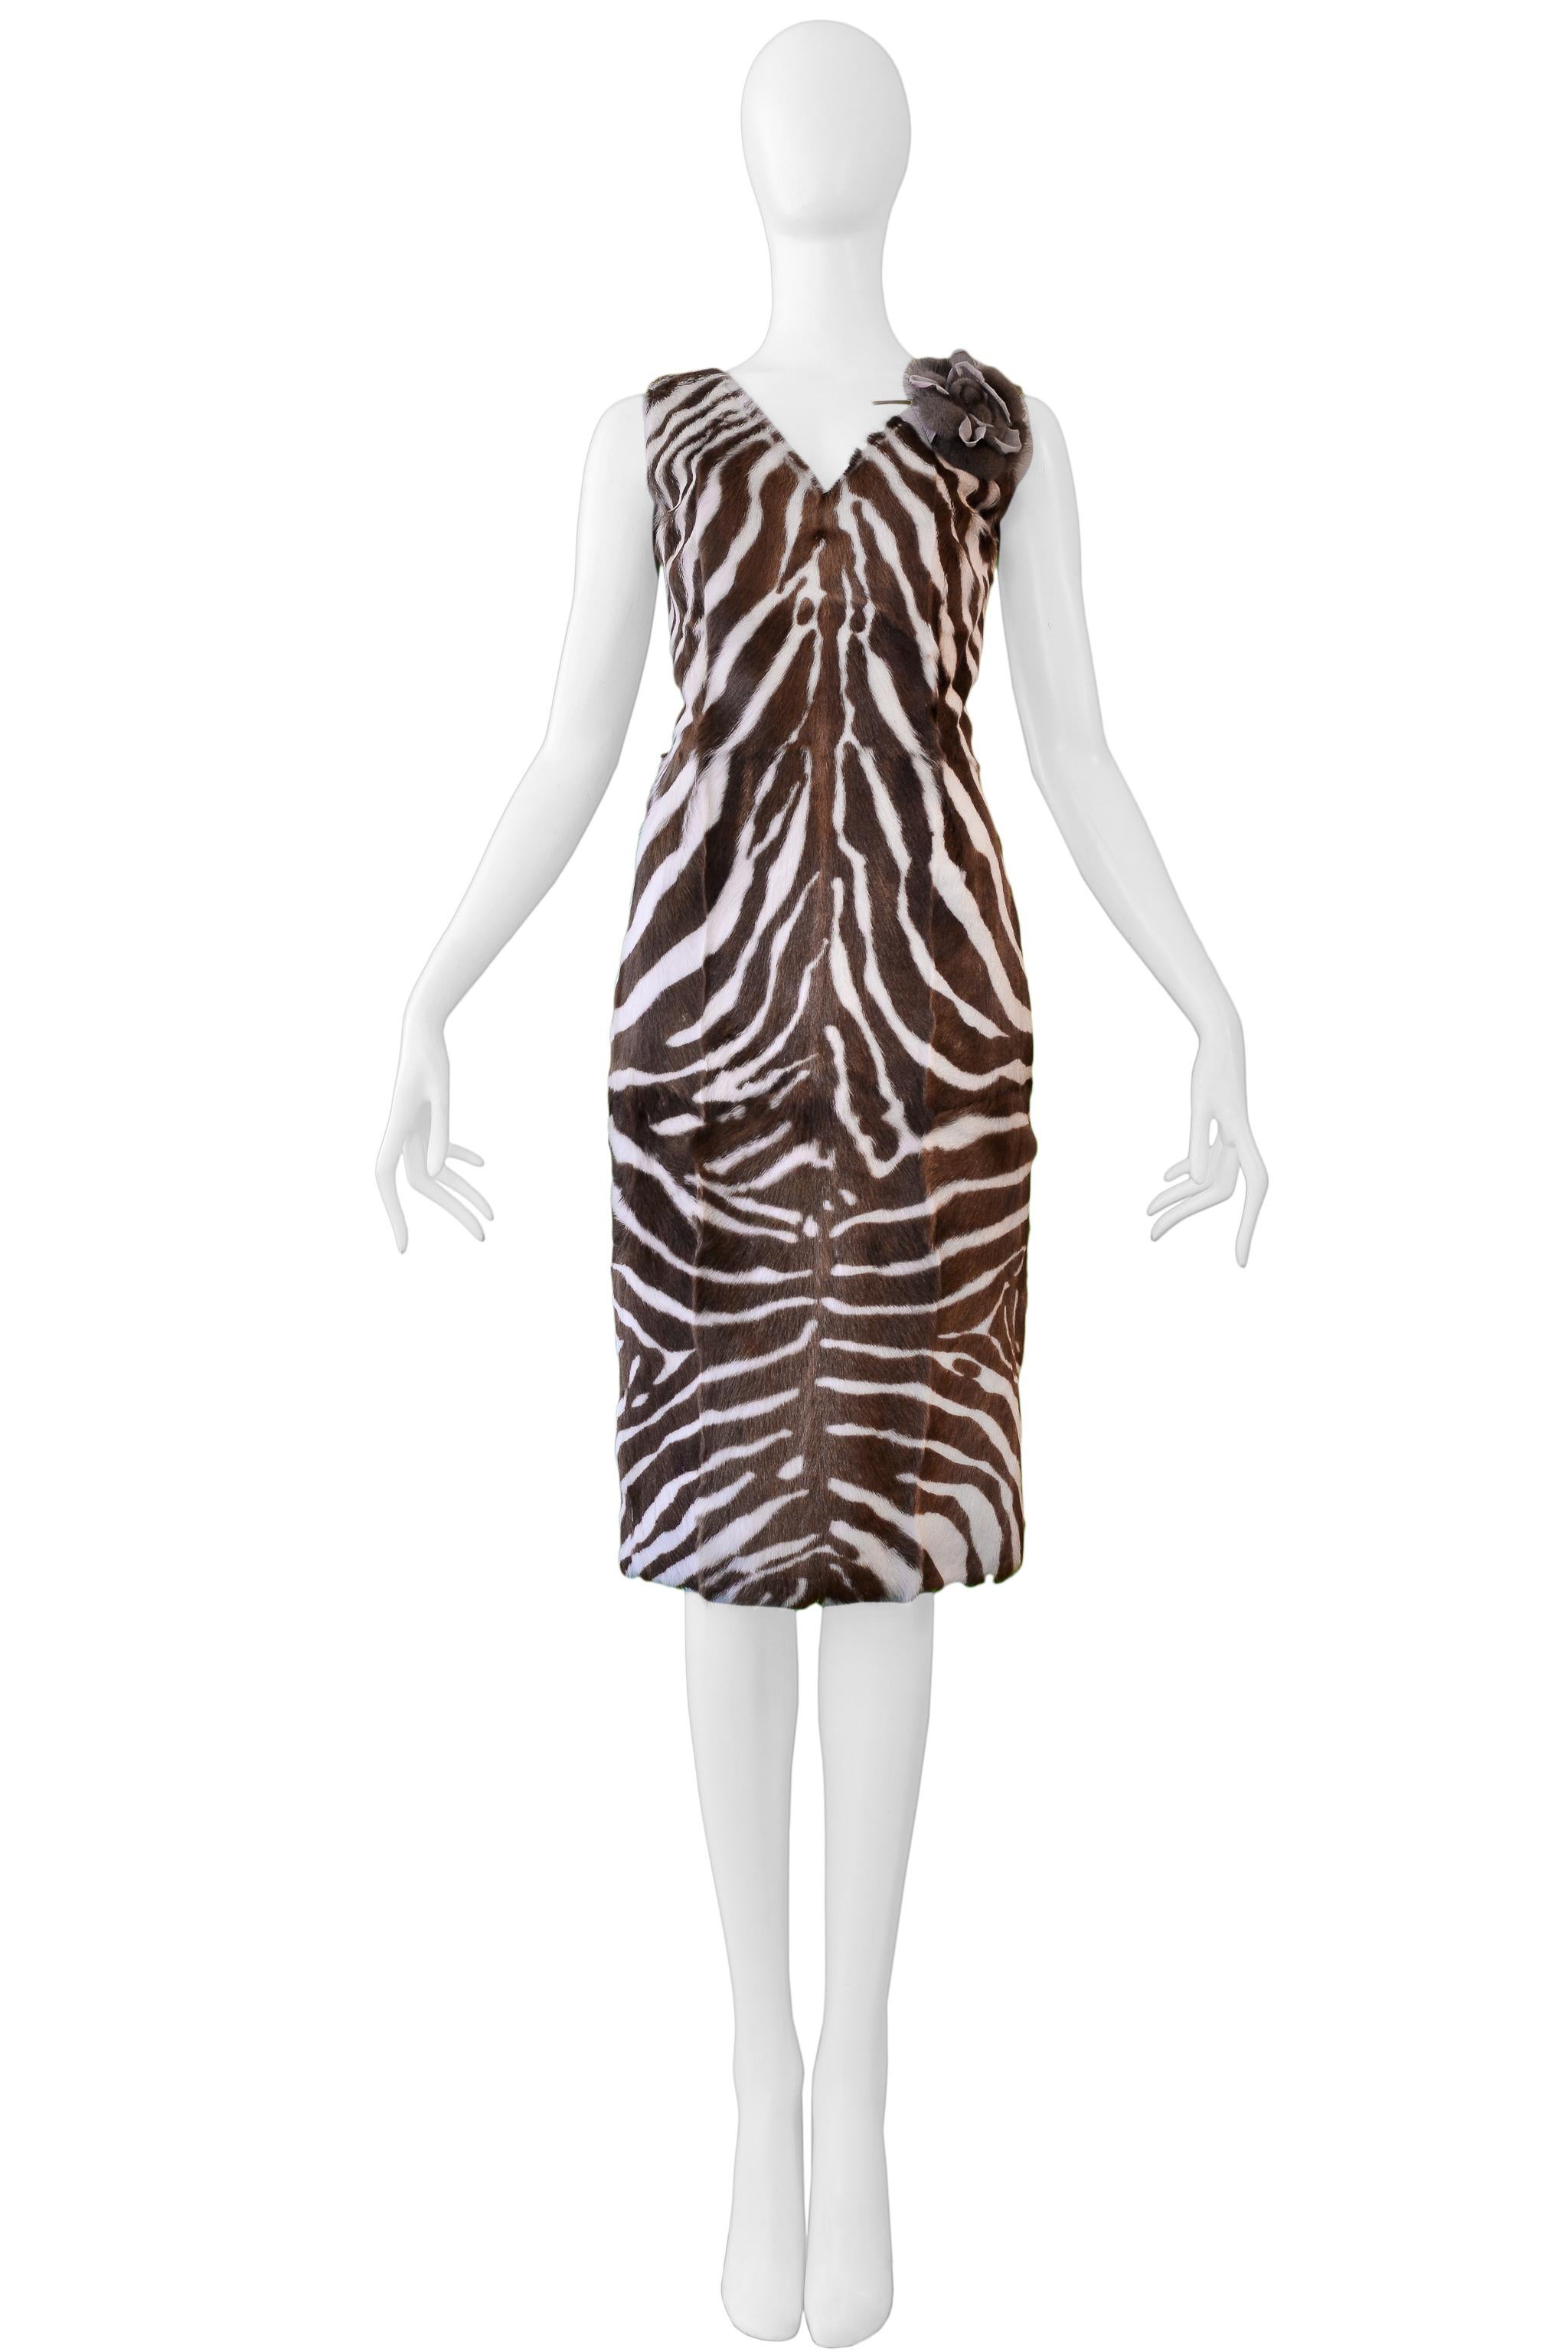 Resurrection Vintage is excited to offer a vintage Dolce & Gabbana brown and off-white zebra-print pony hair dress featuring and v front and back neckline, decorative flower, black bra elastic strap closure, and center back zipper.

Dolce &